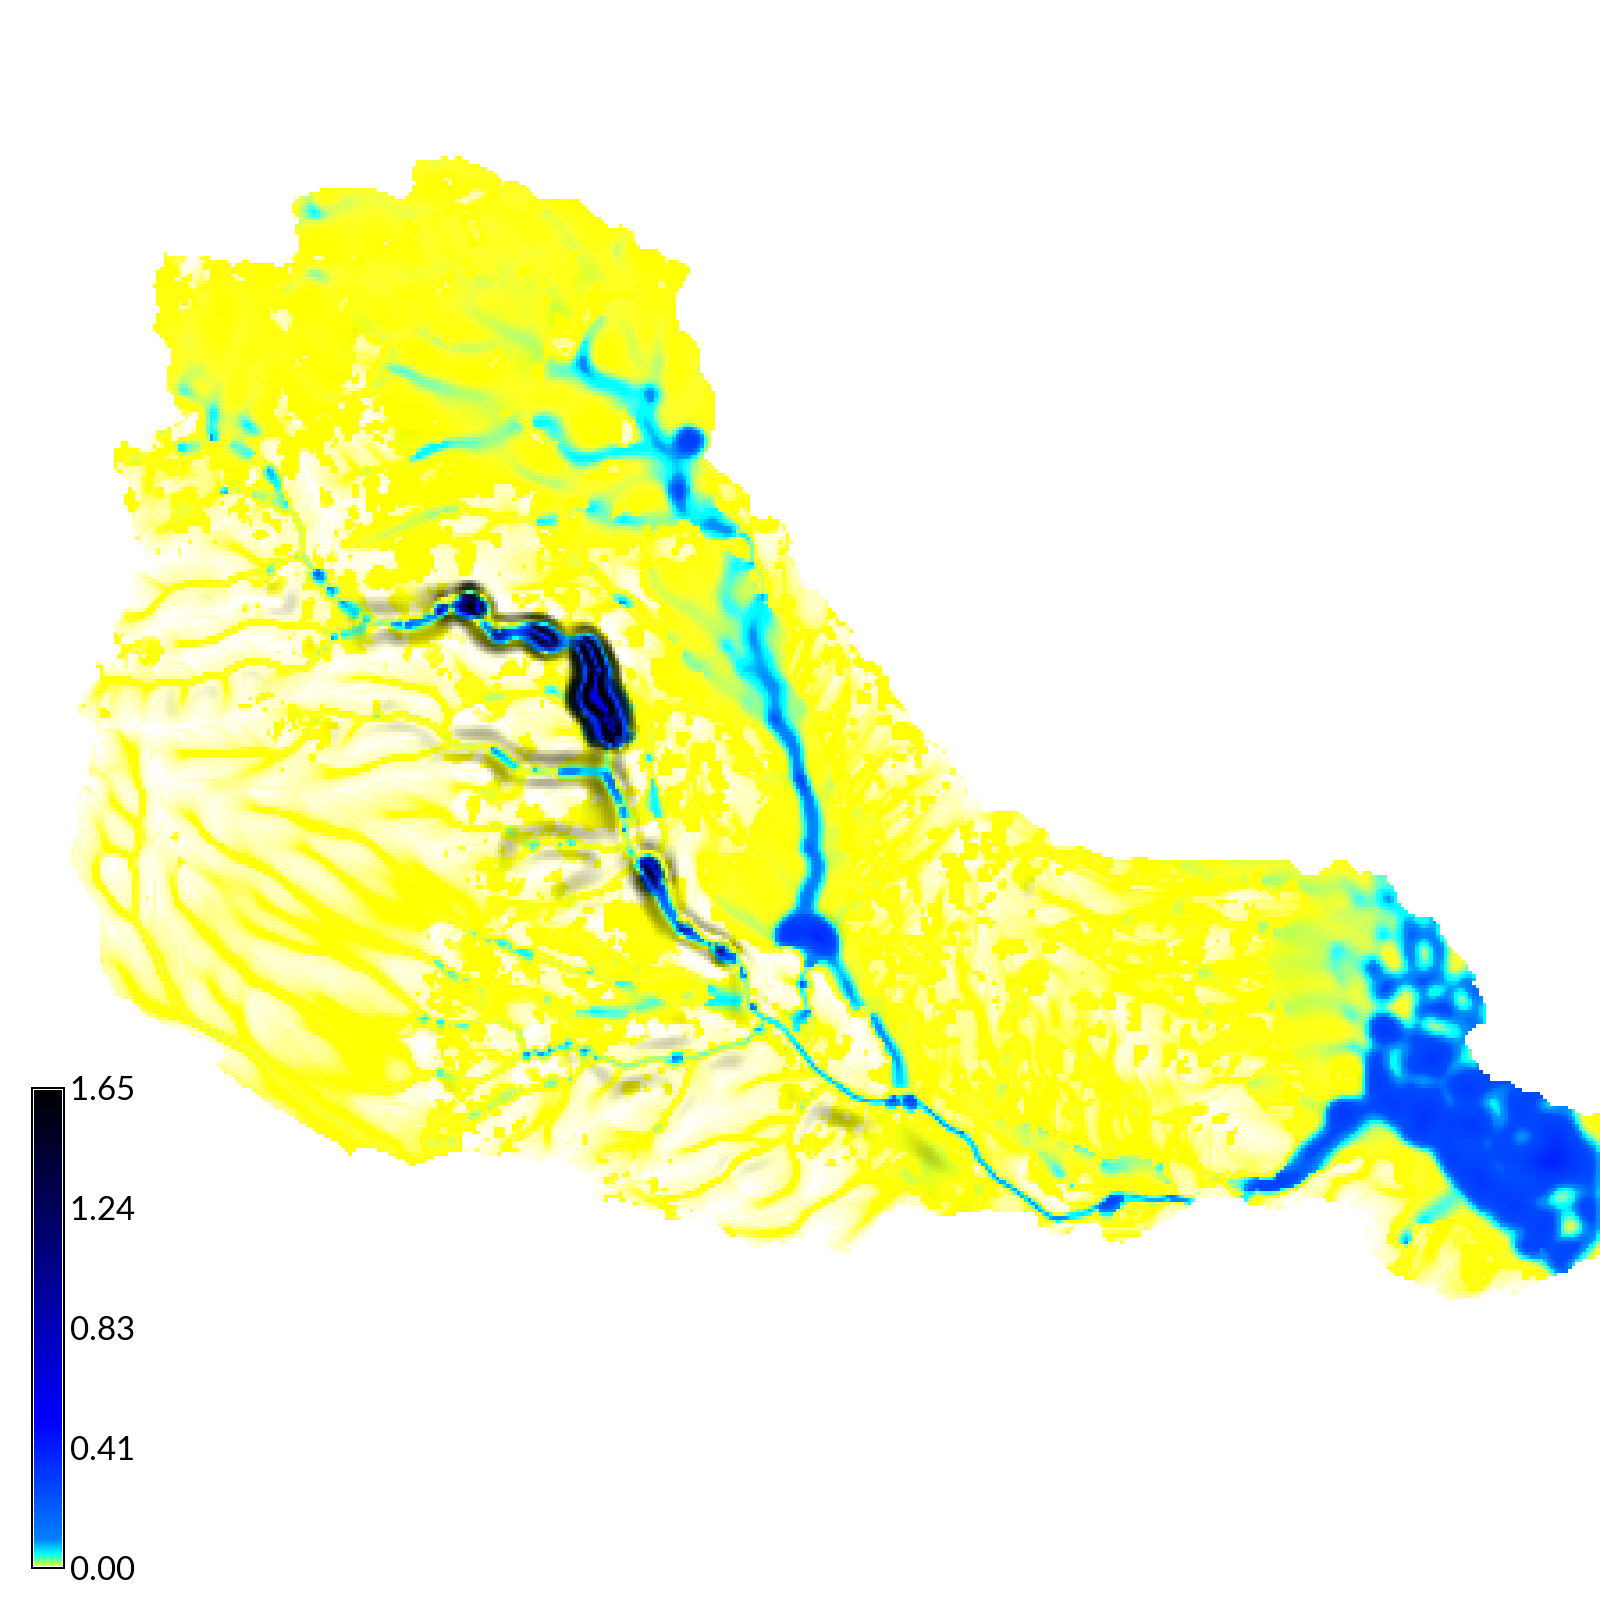 Water depth simulated by SIMWE after a 50 mm/hr rainfall event lasting 120 min